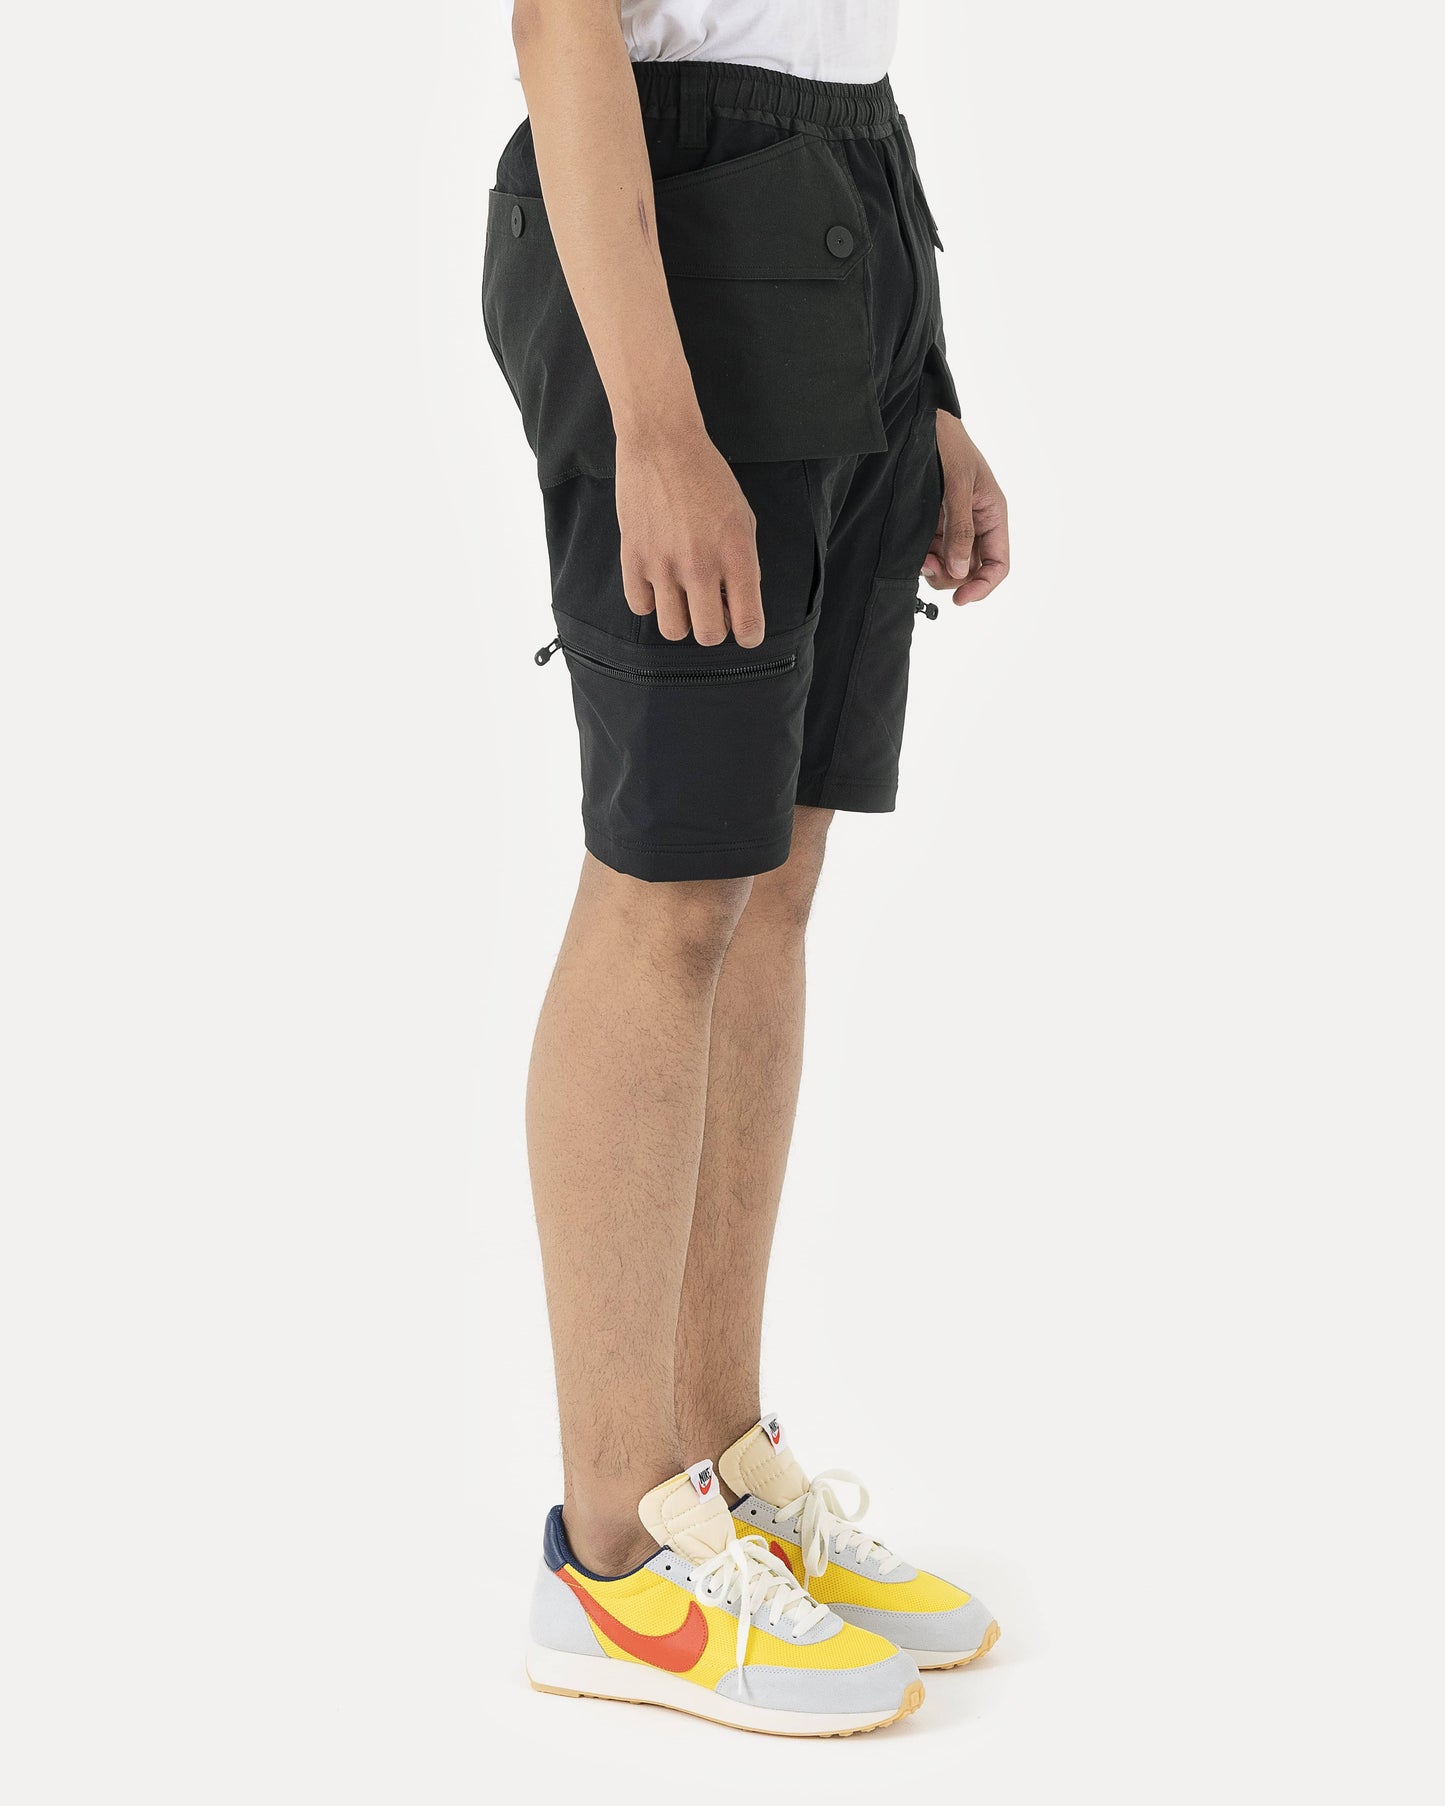 White Mountaineering Men's Shorts Military Shorts in Black